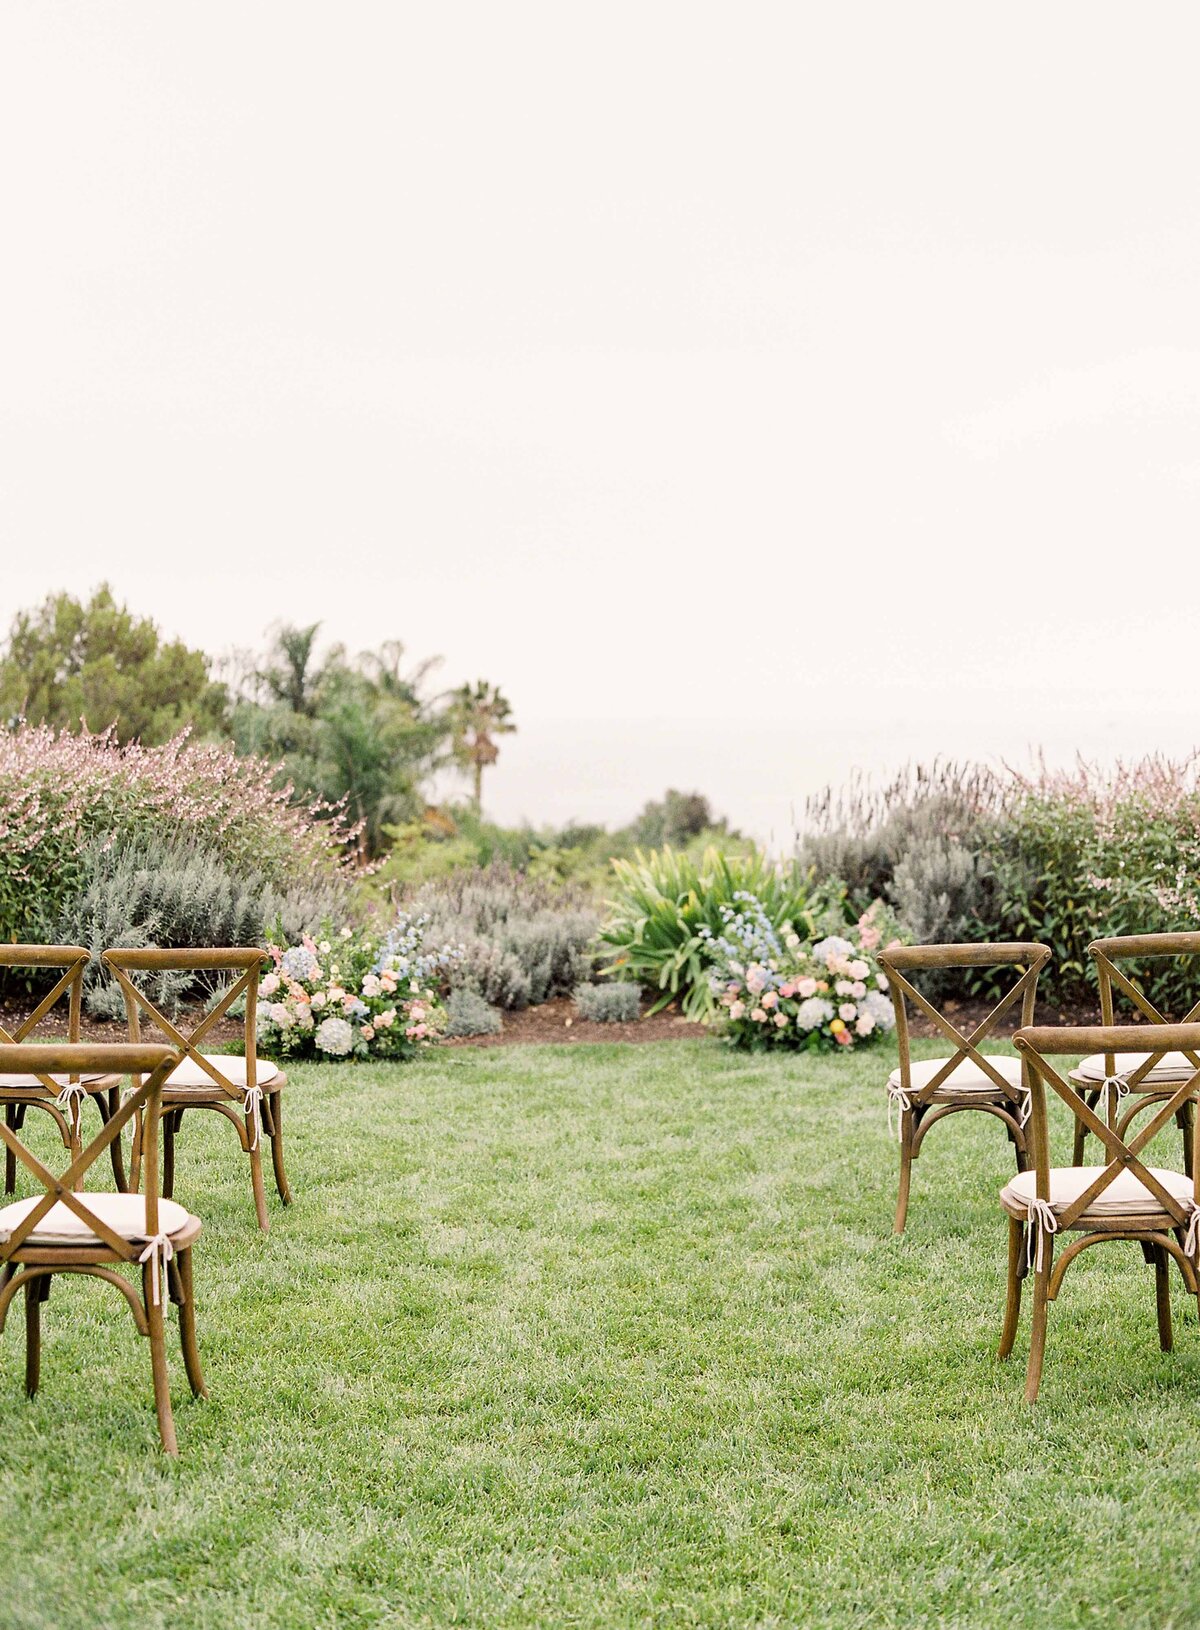 14santa-barbara-estate-wedding-planner-natural-ceremony-decor-aisle-markers-wooden-x-back-chairs